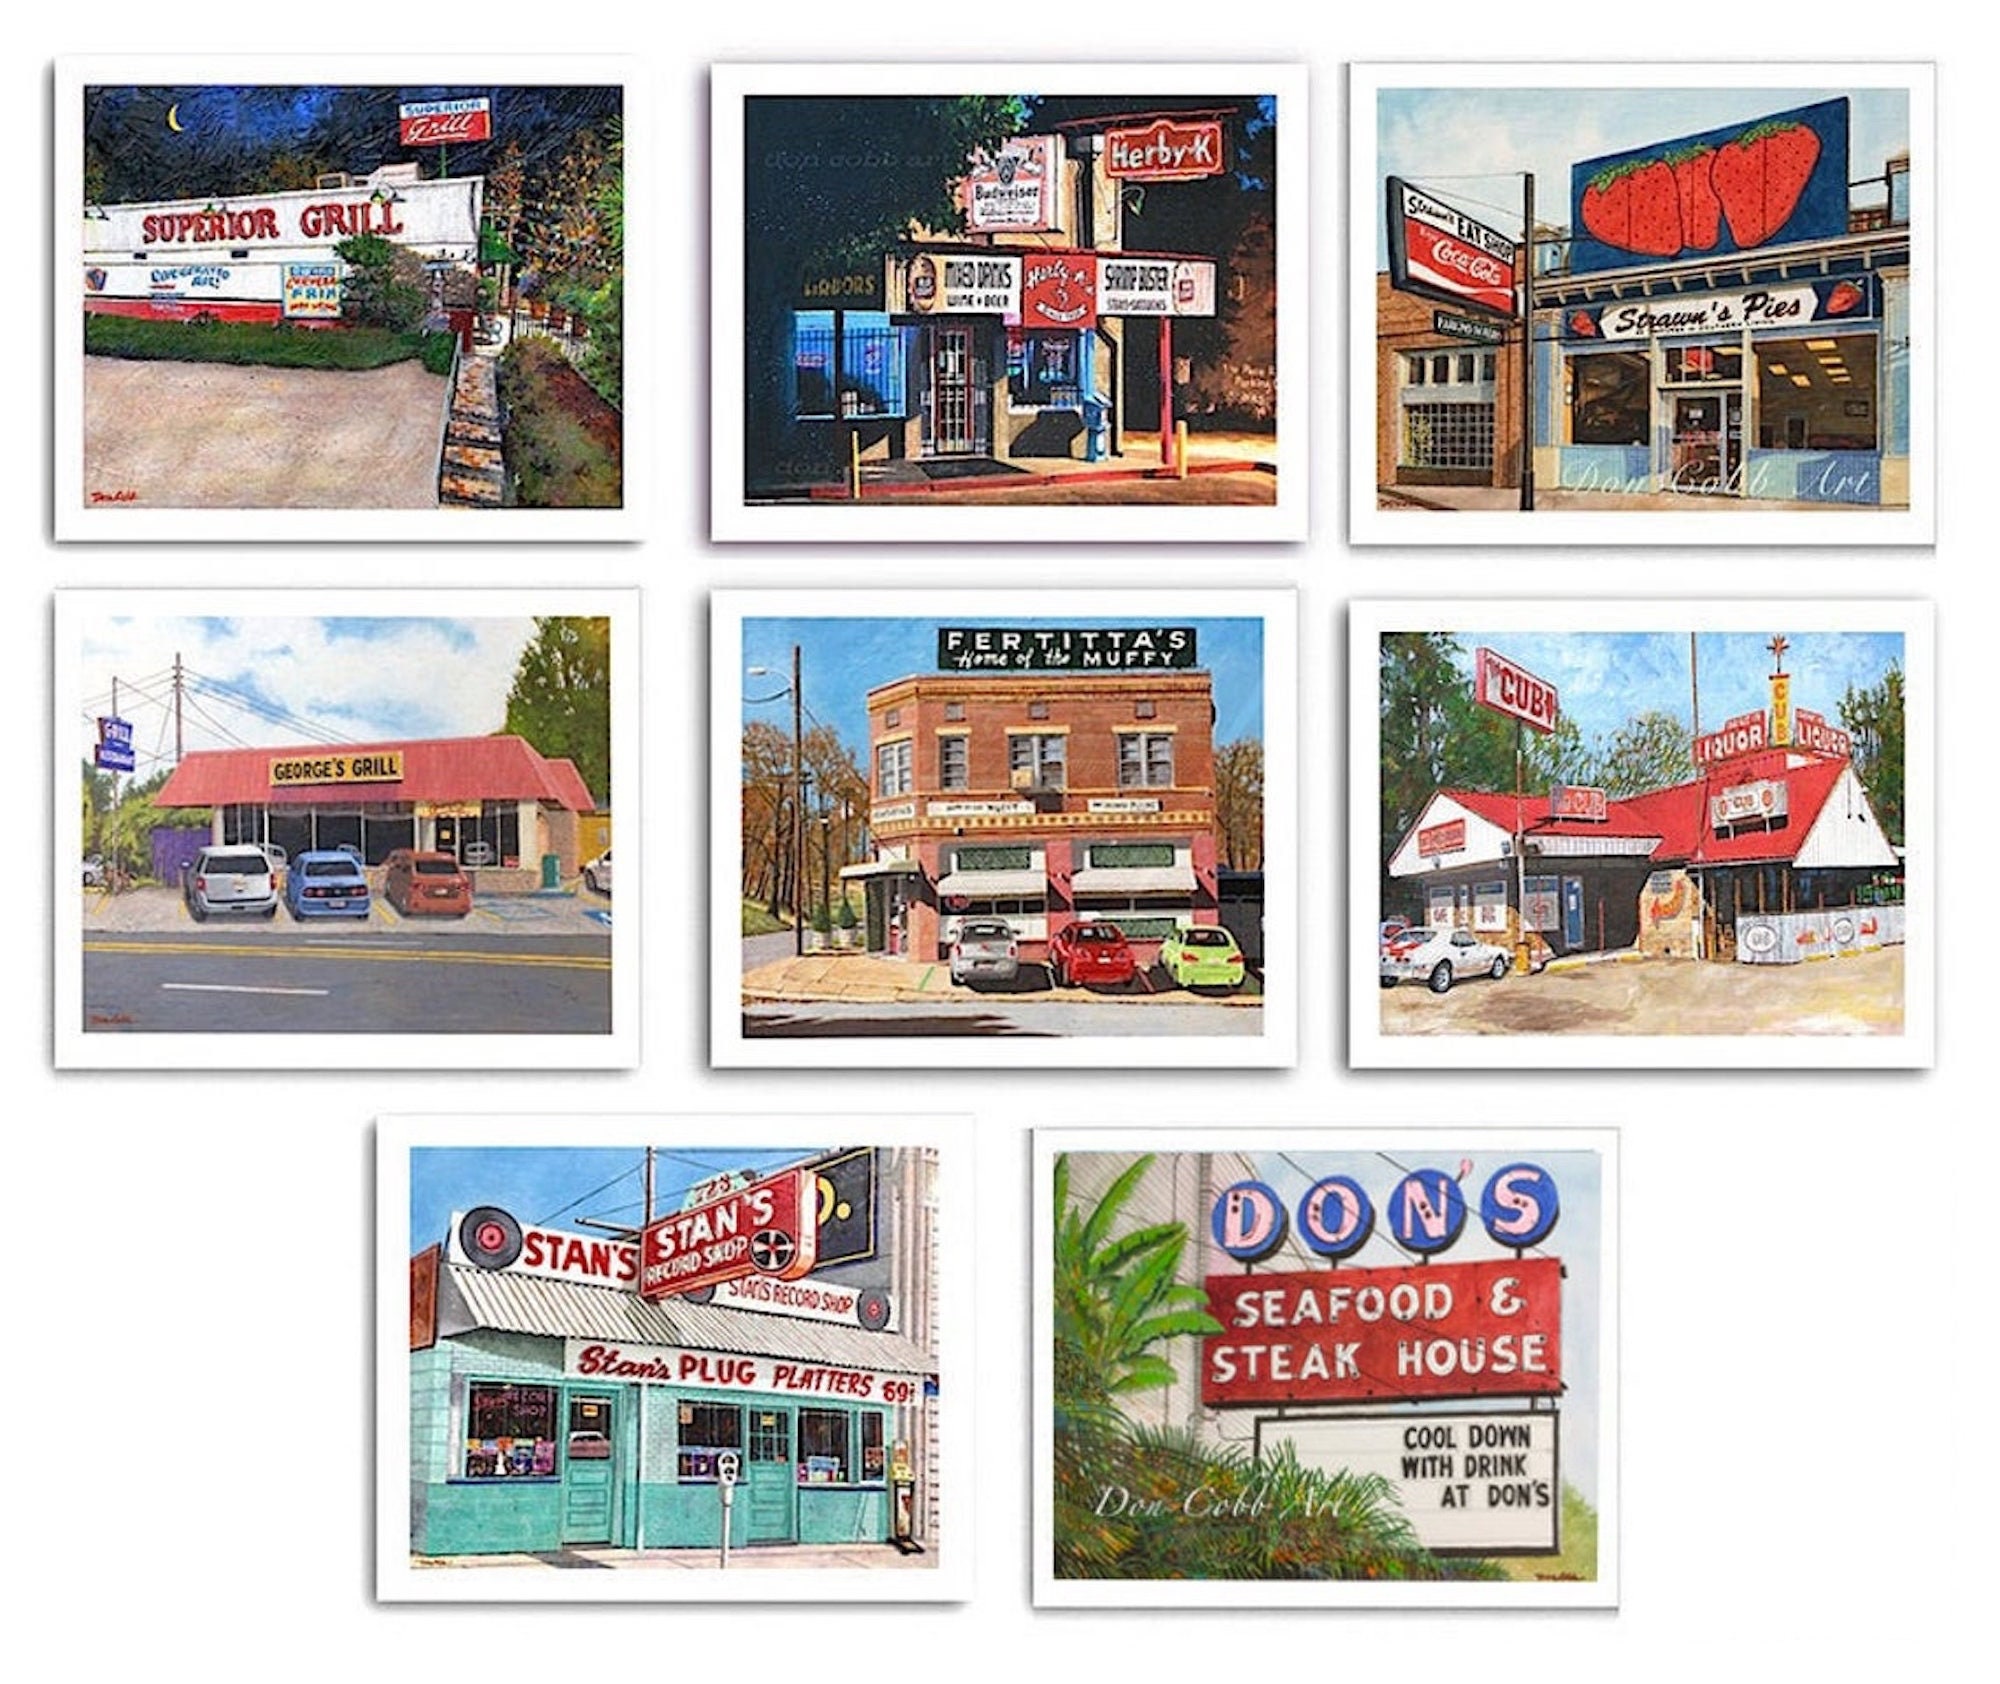 Shreveport Icon Art - Eight 8x10 Or 11x14 13x19" Prints Two Are Free On Each Size Signed & Numbered Prints"